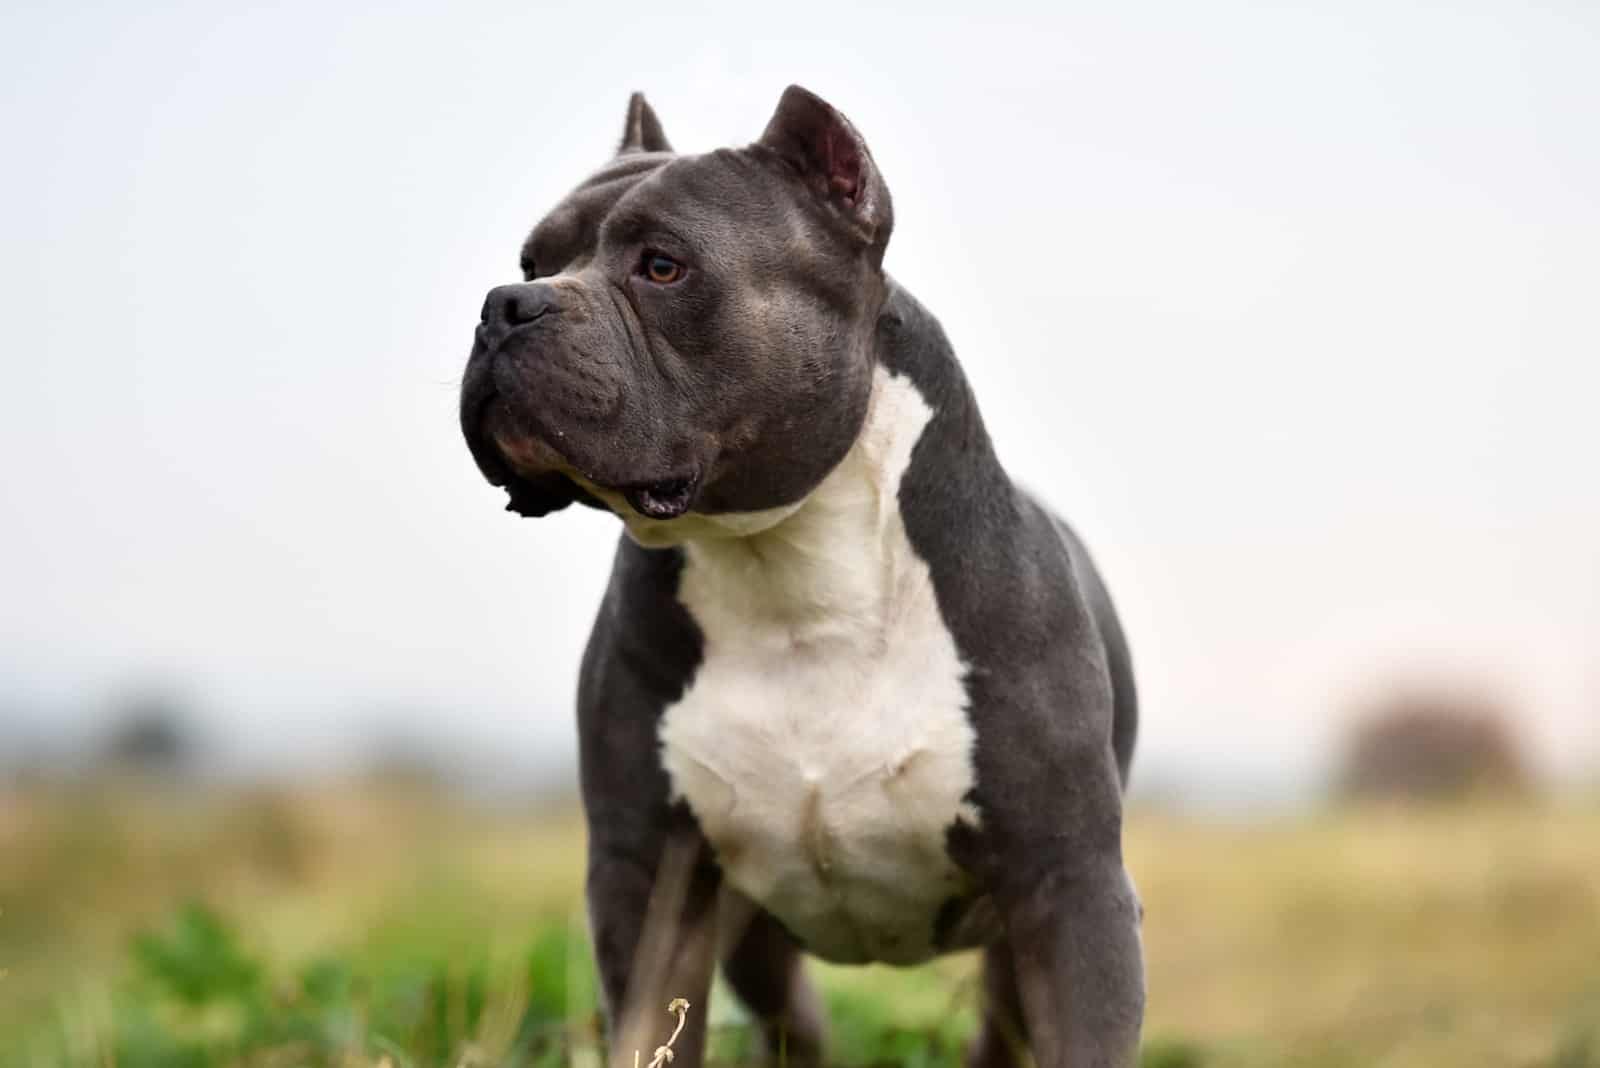 American Bully standing outside